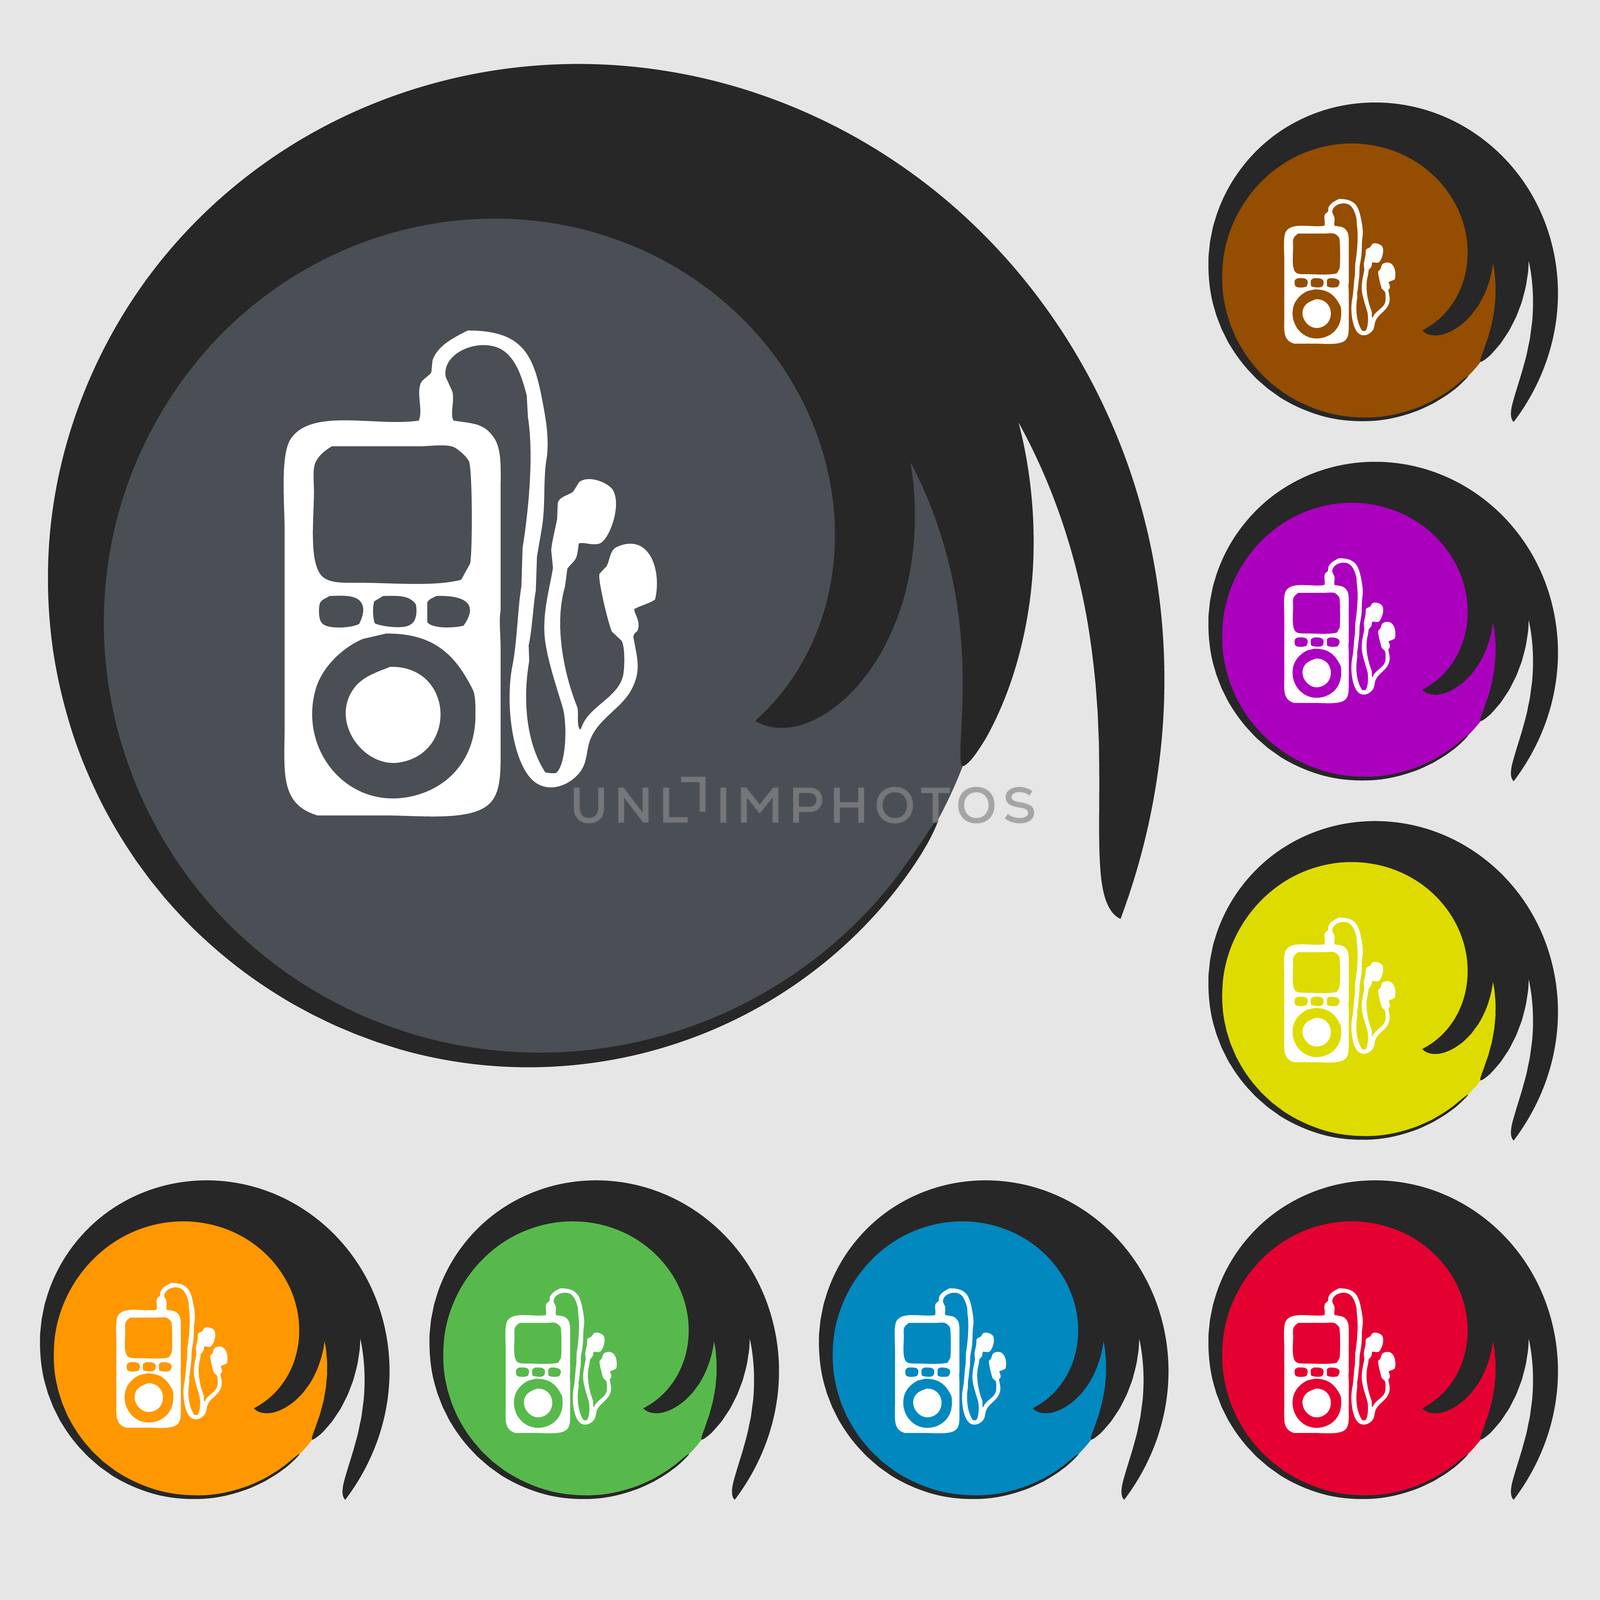 MP3 player, headphones, music icon sign. Symbol on eight colored buttons. illustration